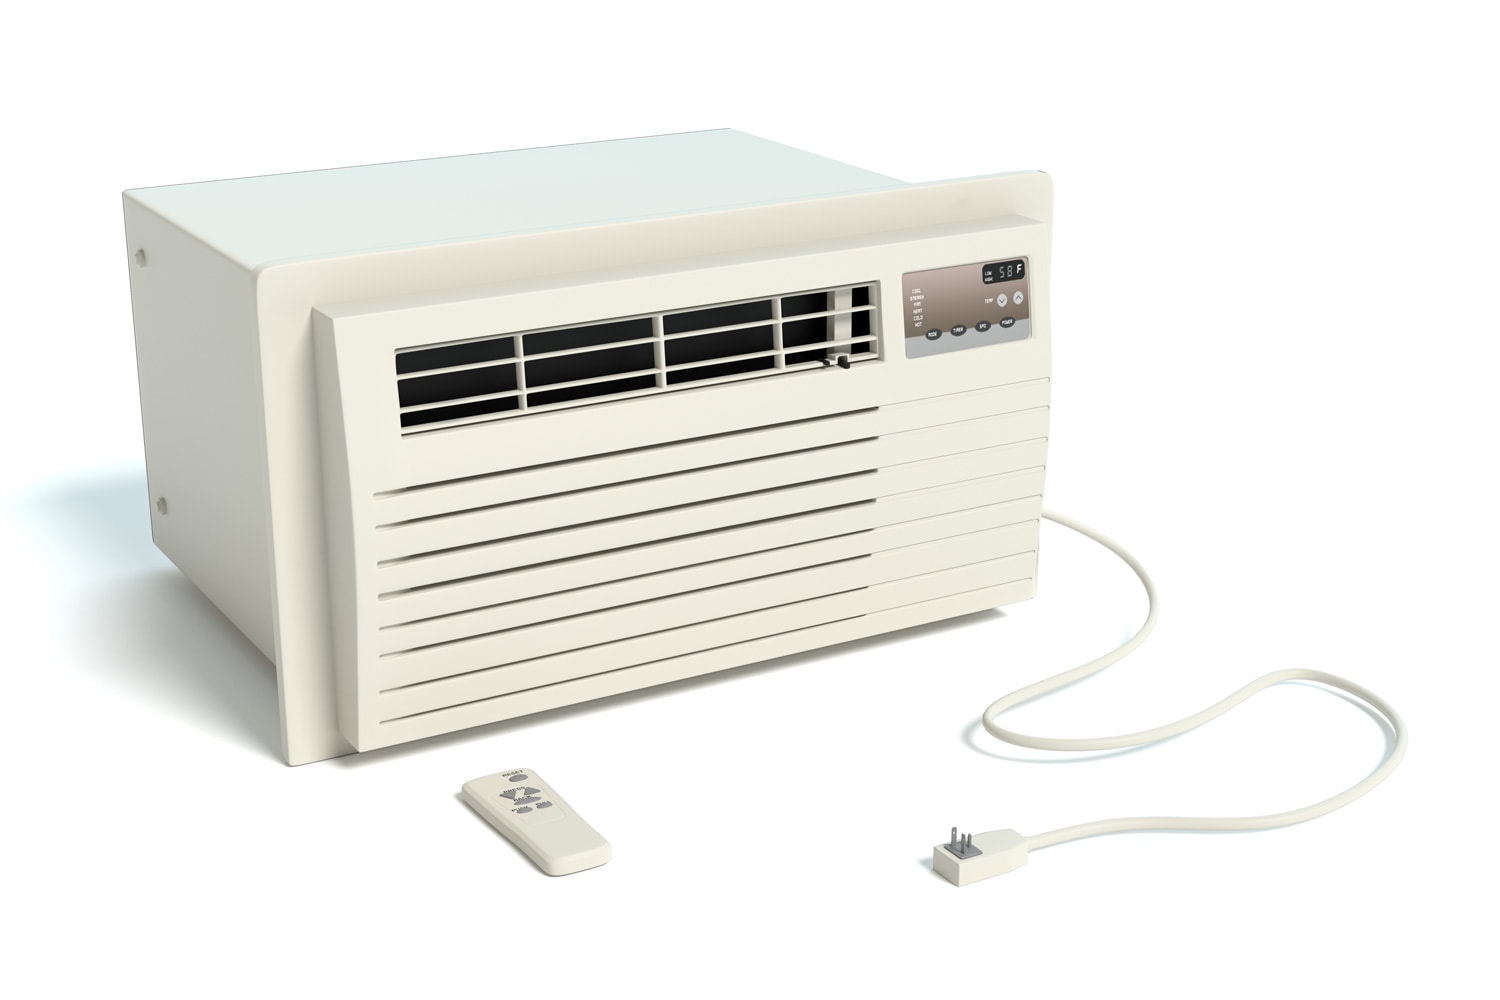 3d illustration of an air conditioner